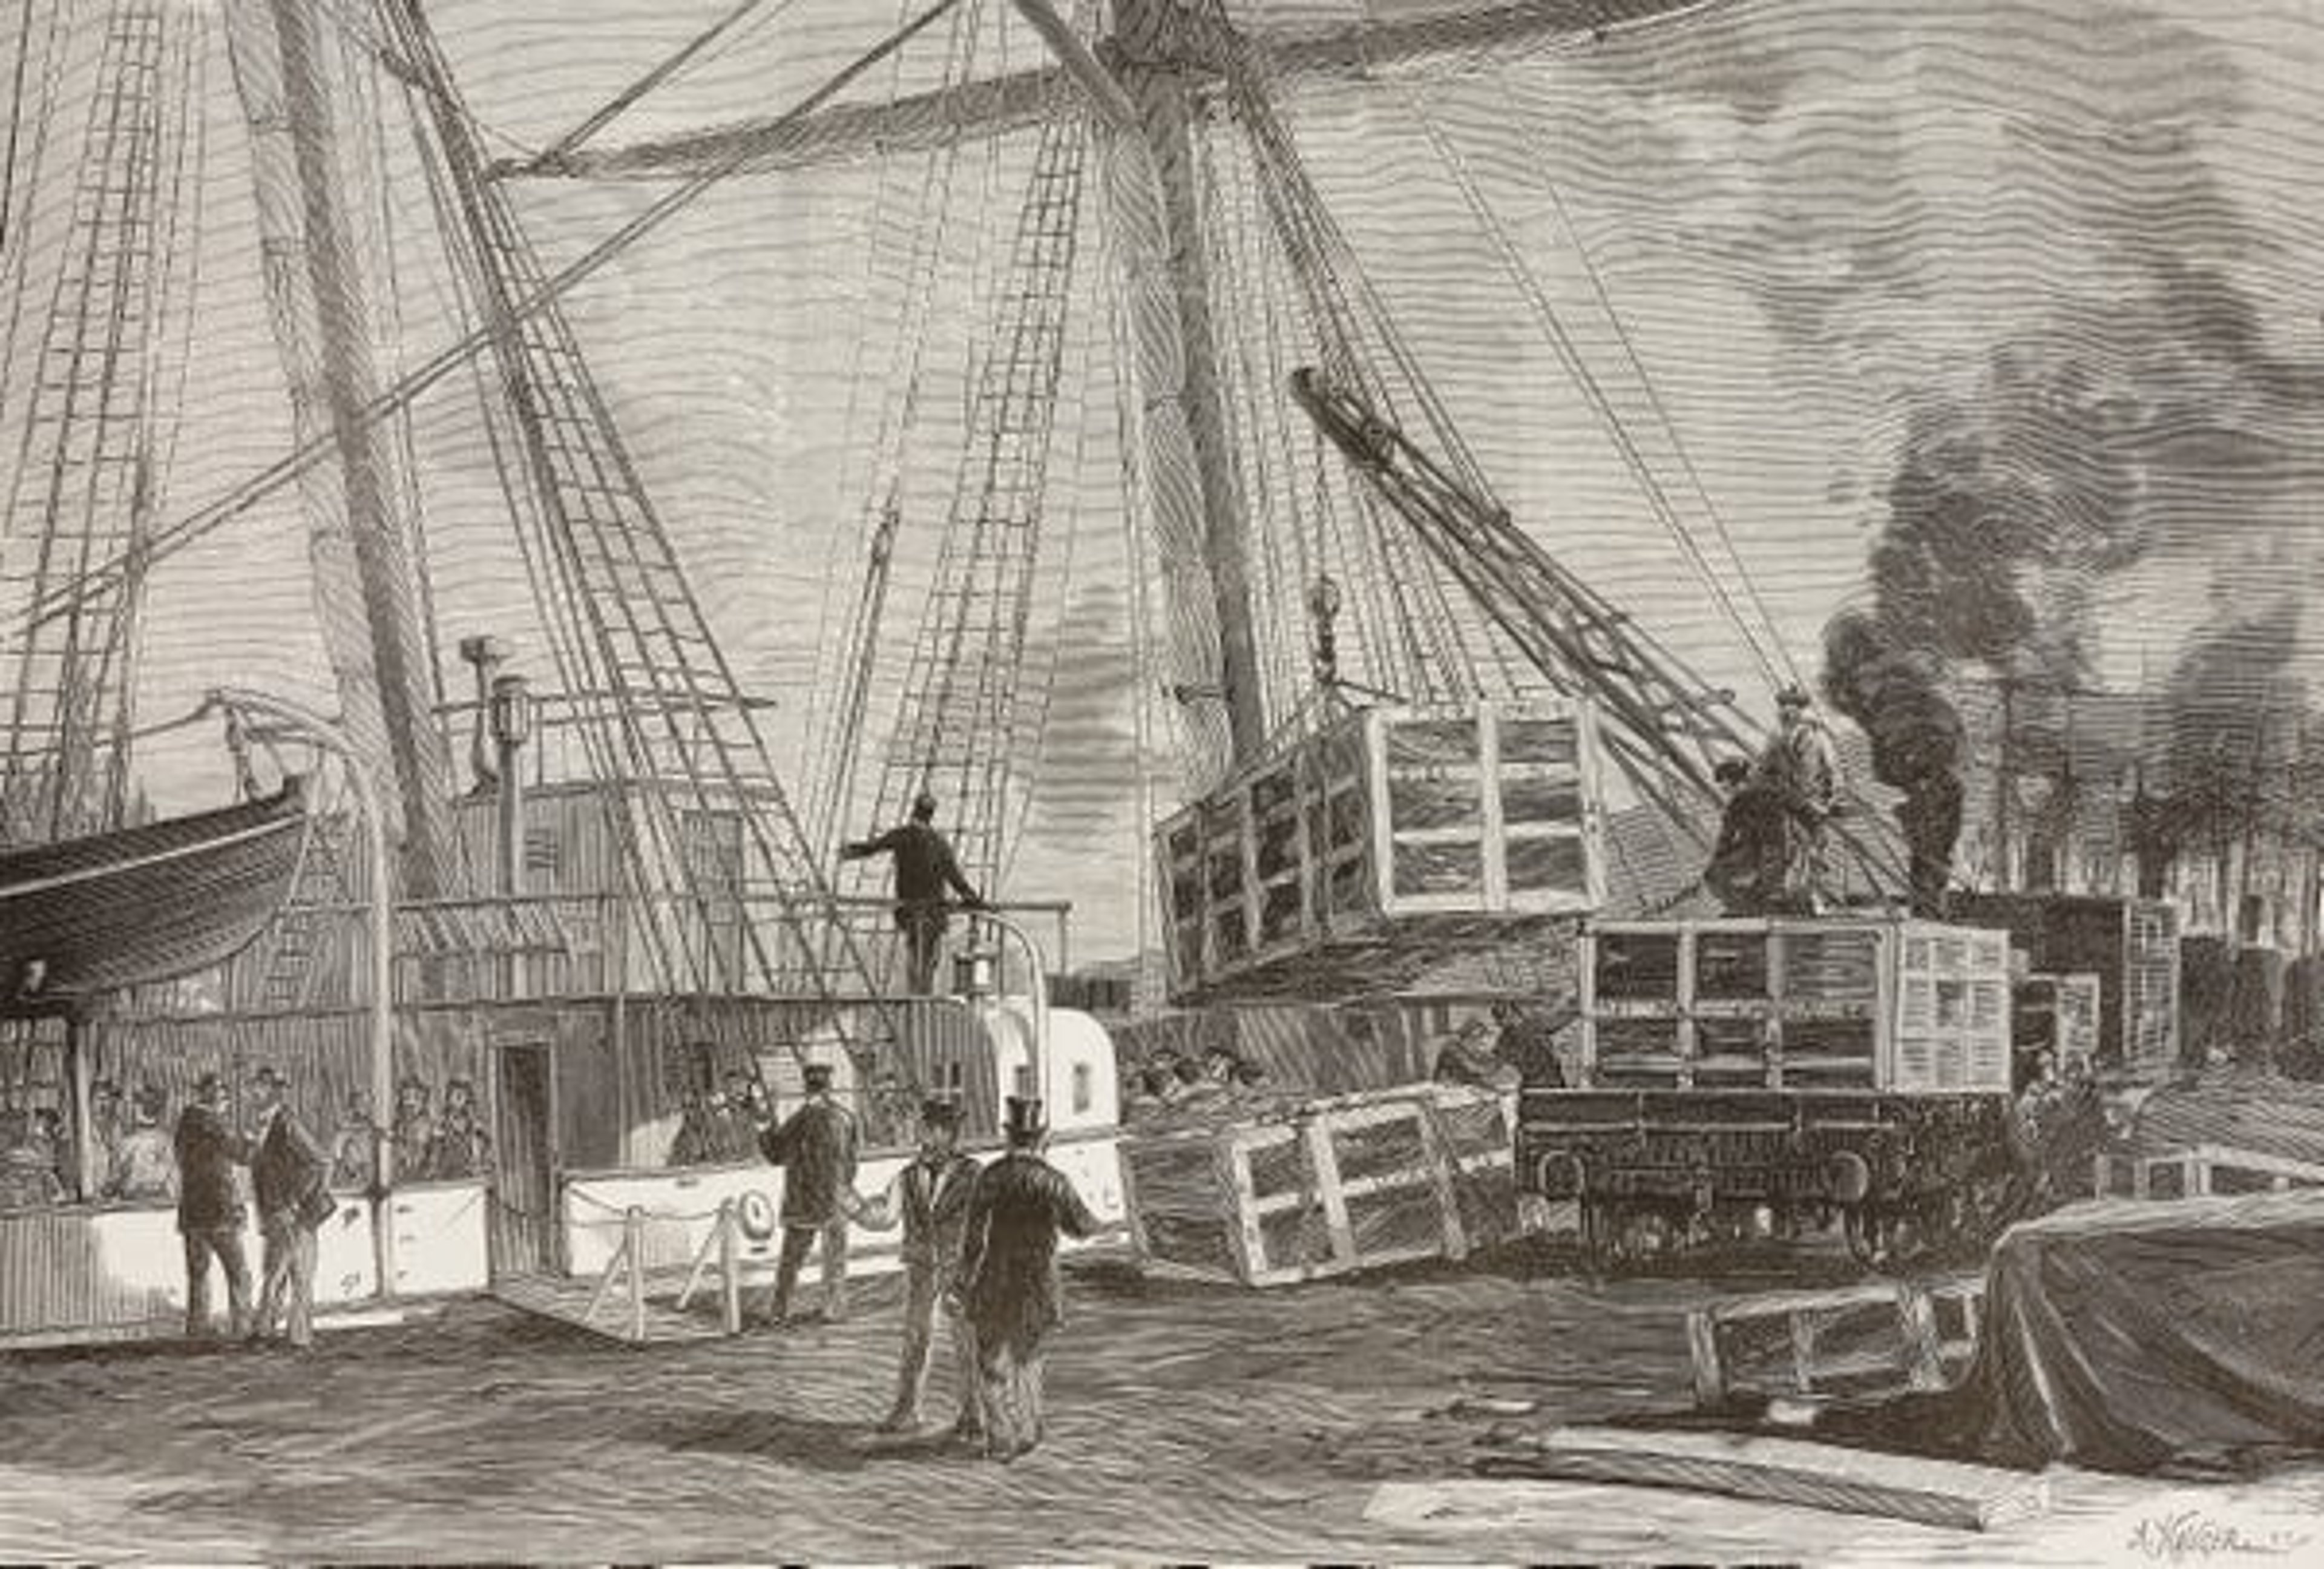 Transporting the Statue of Liberty to New York (A Remarkable Story)